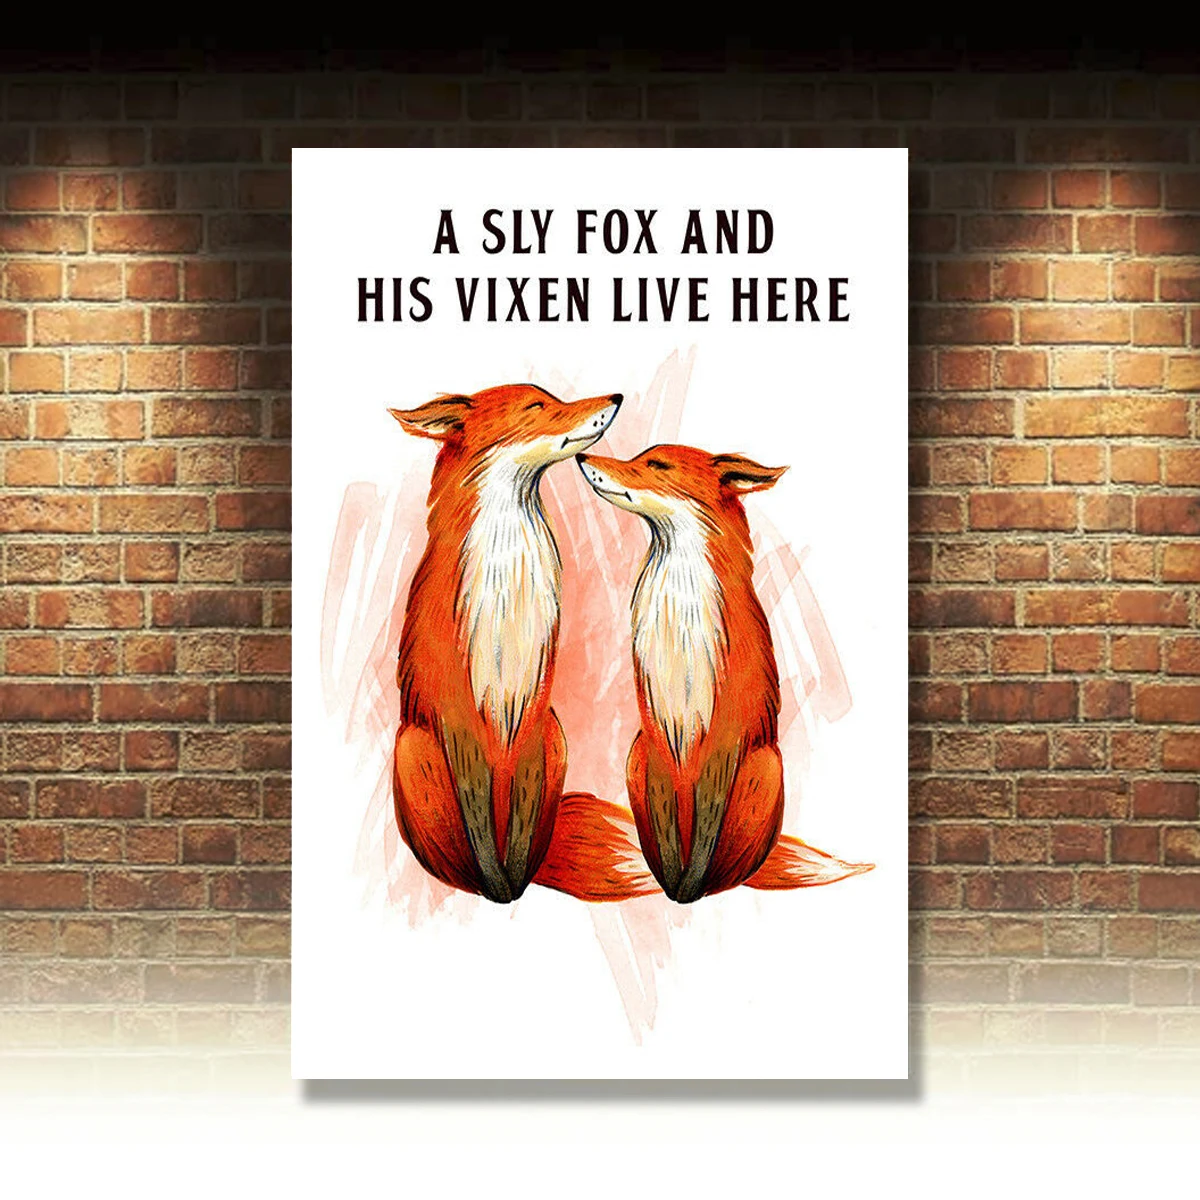 

A Sly Fox and His Vixen Live Here Sign Metal Plaque Art Poster Print